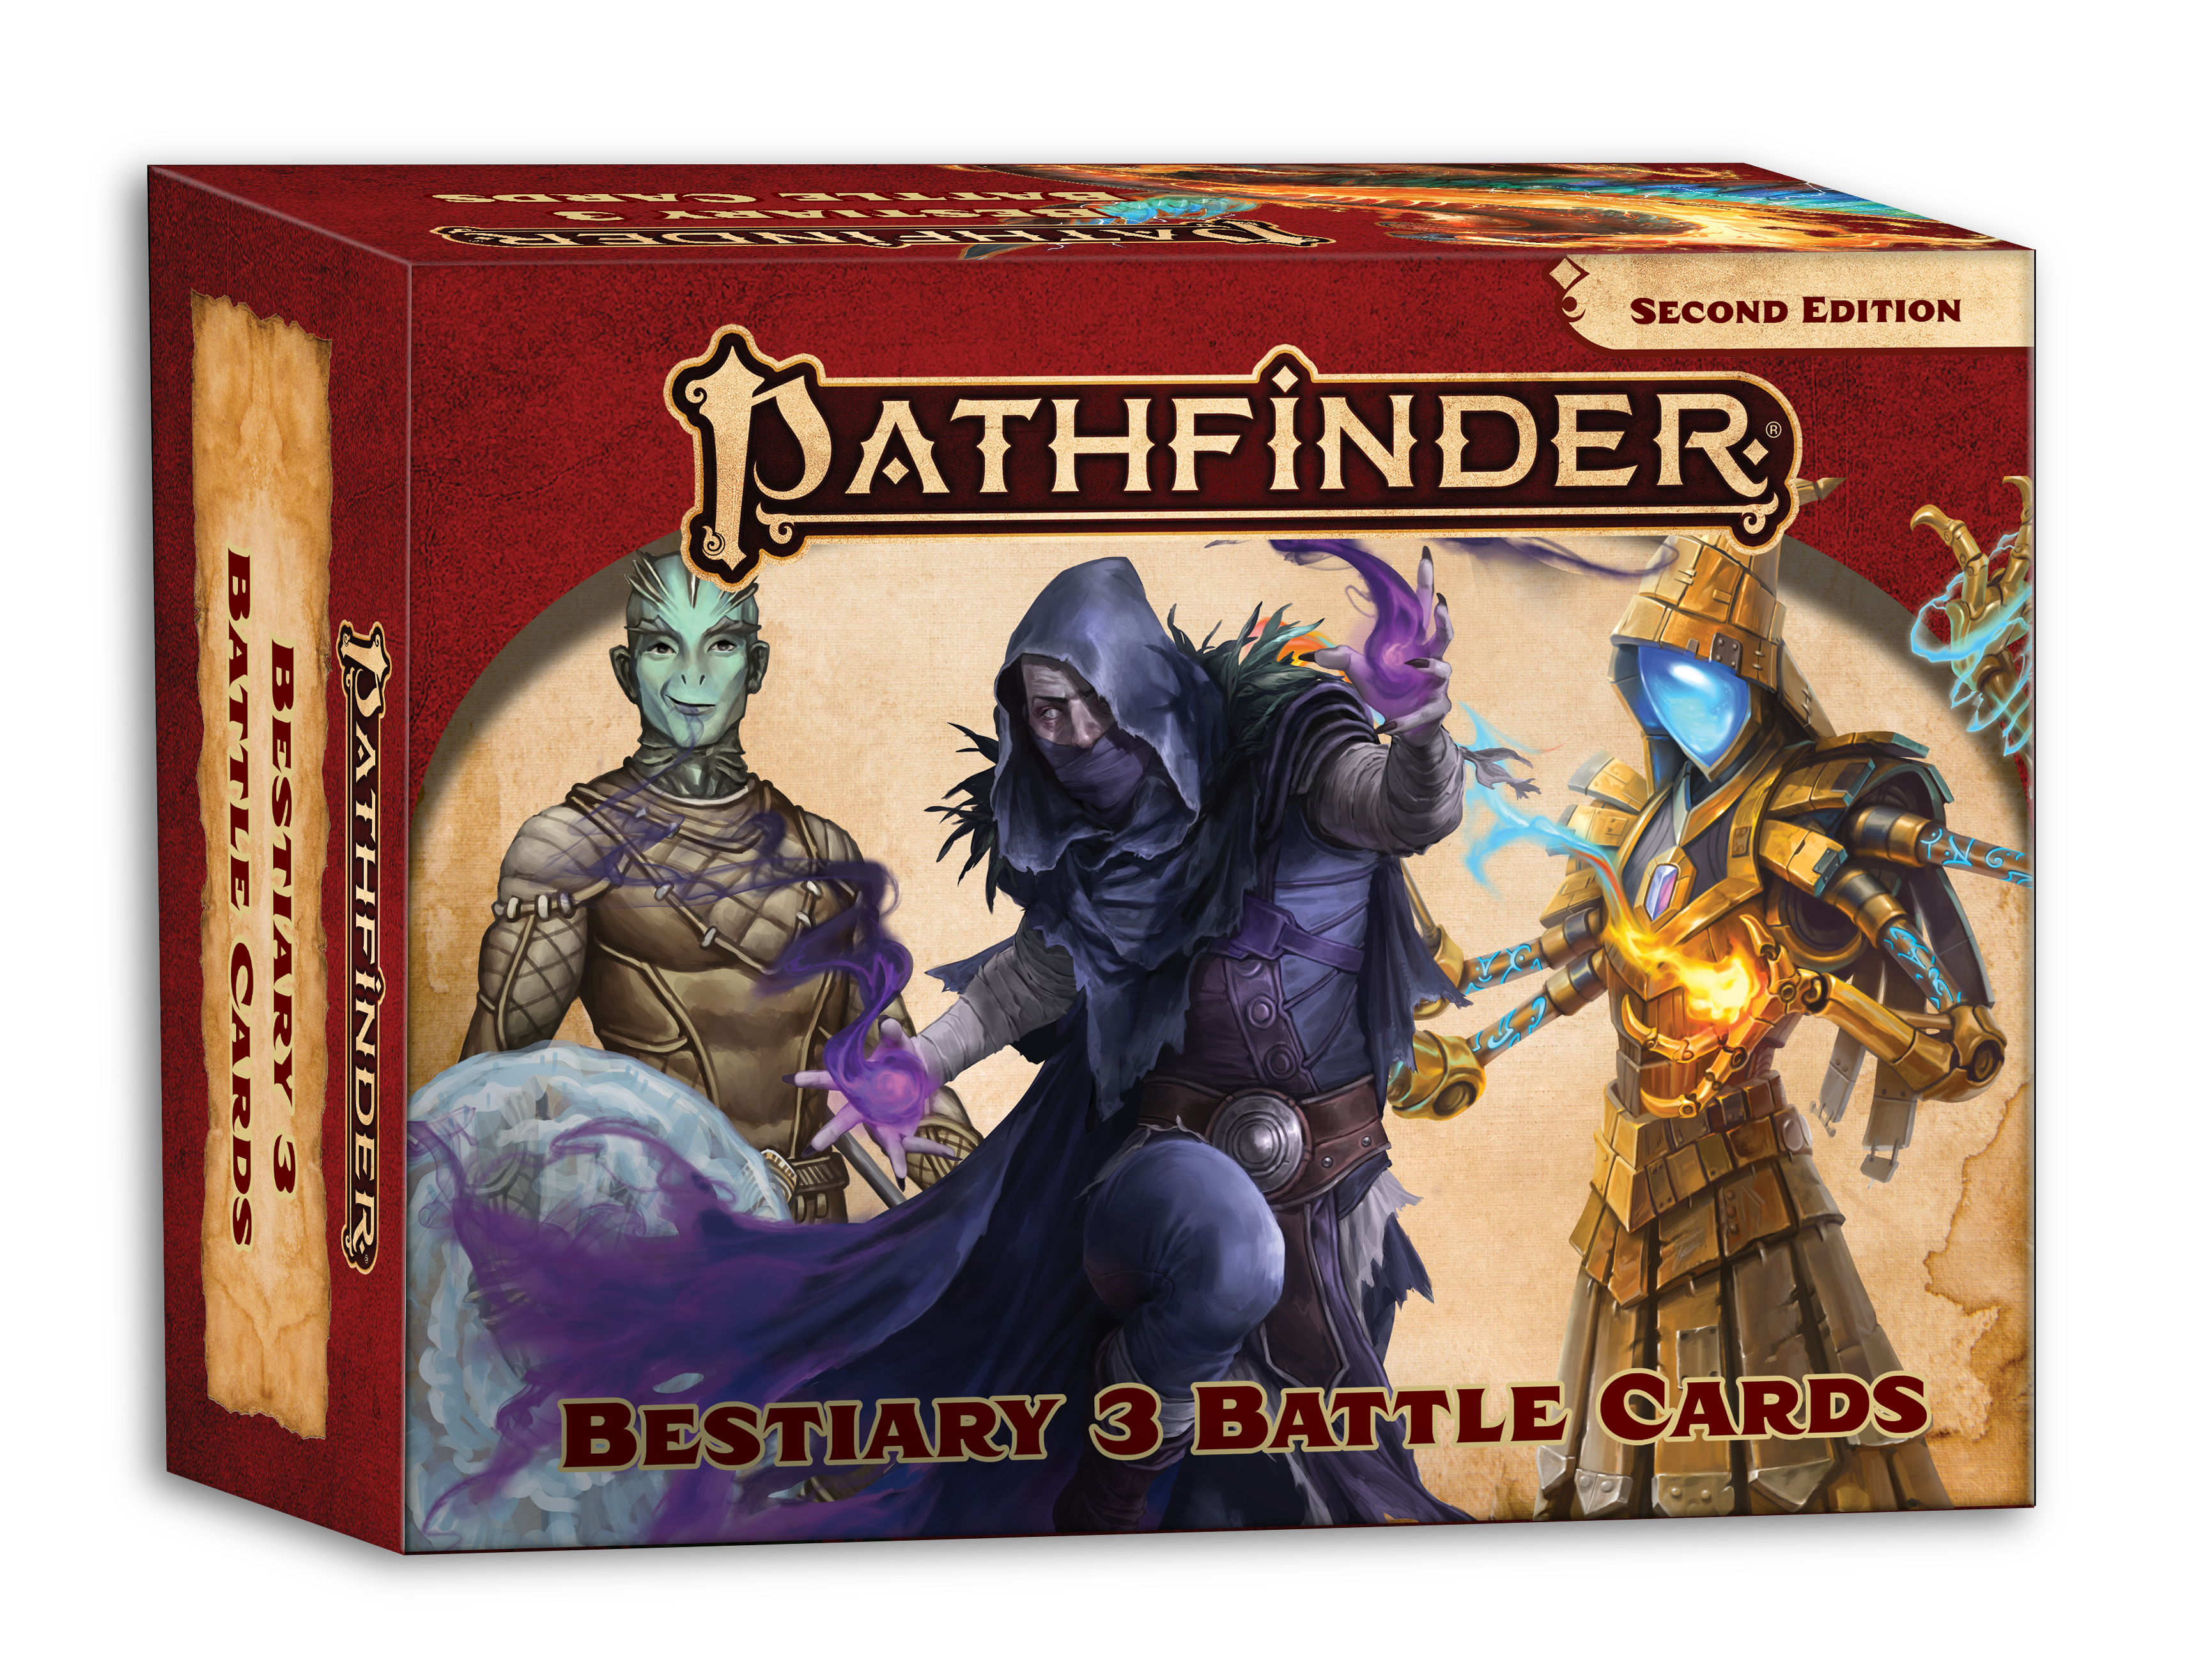 Pathfinder Second Edition Bestiary 3 Battle Cards box mock up